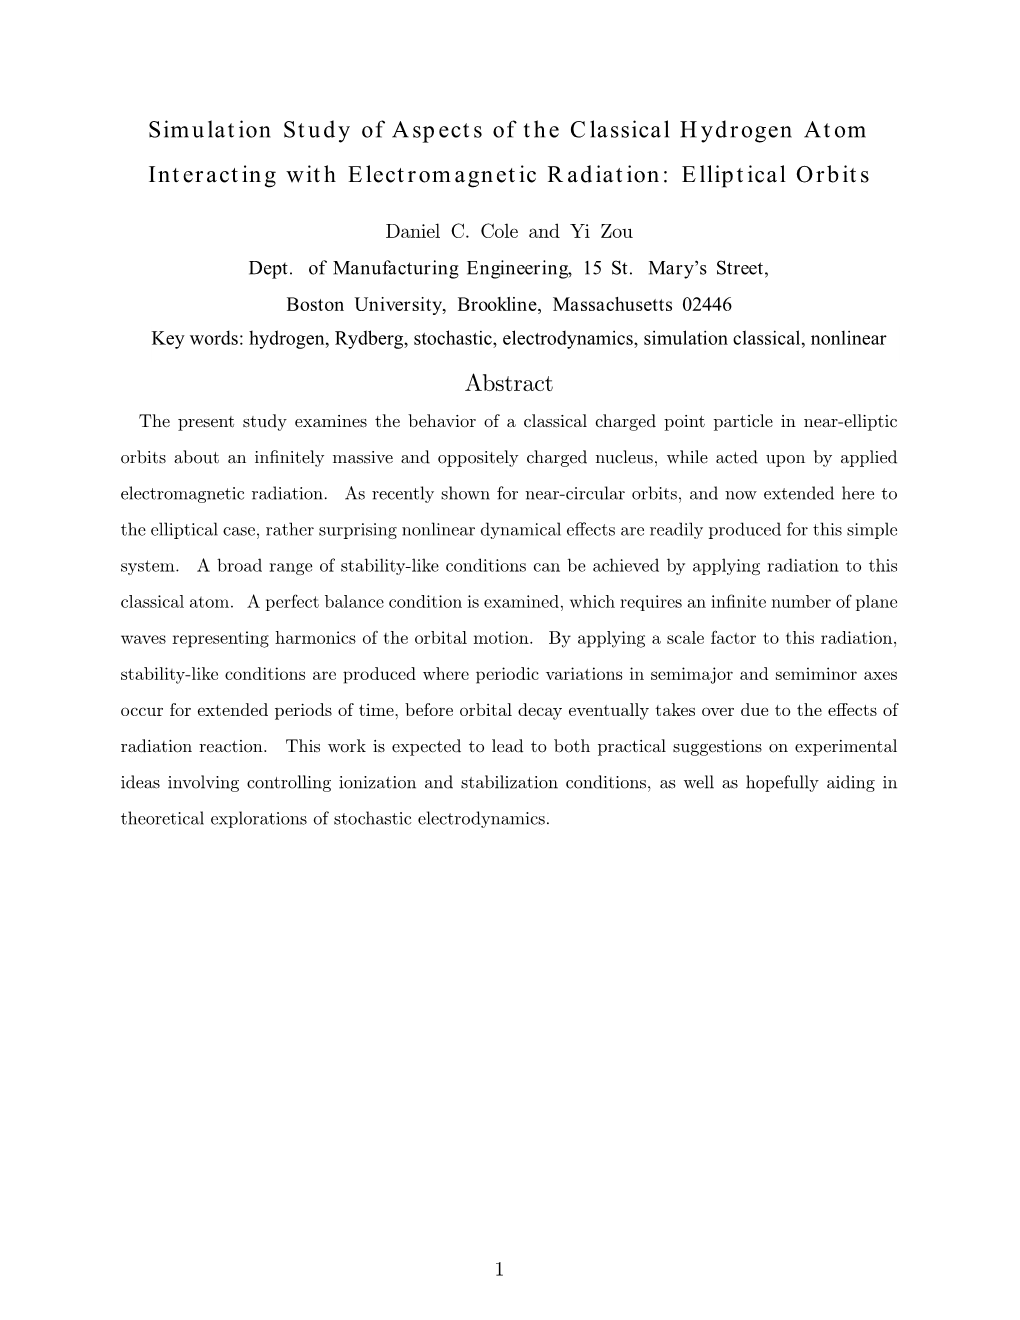 Simulation Study of Aspects of the Classical Hydrogen Atom Interacting with Electromagnetic Radiation: Elliptical Orbits